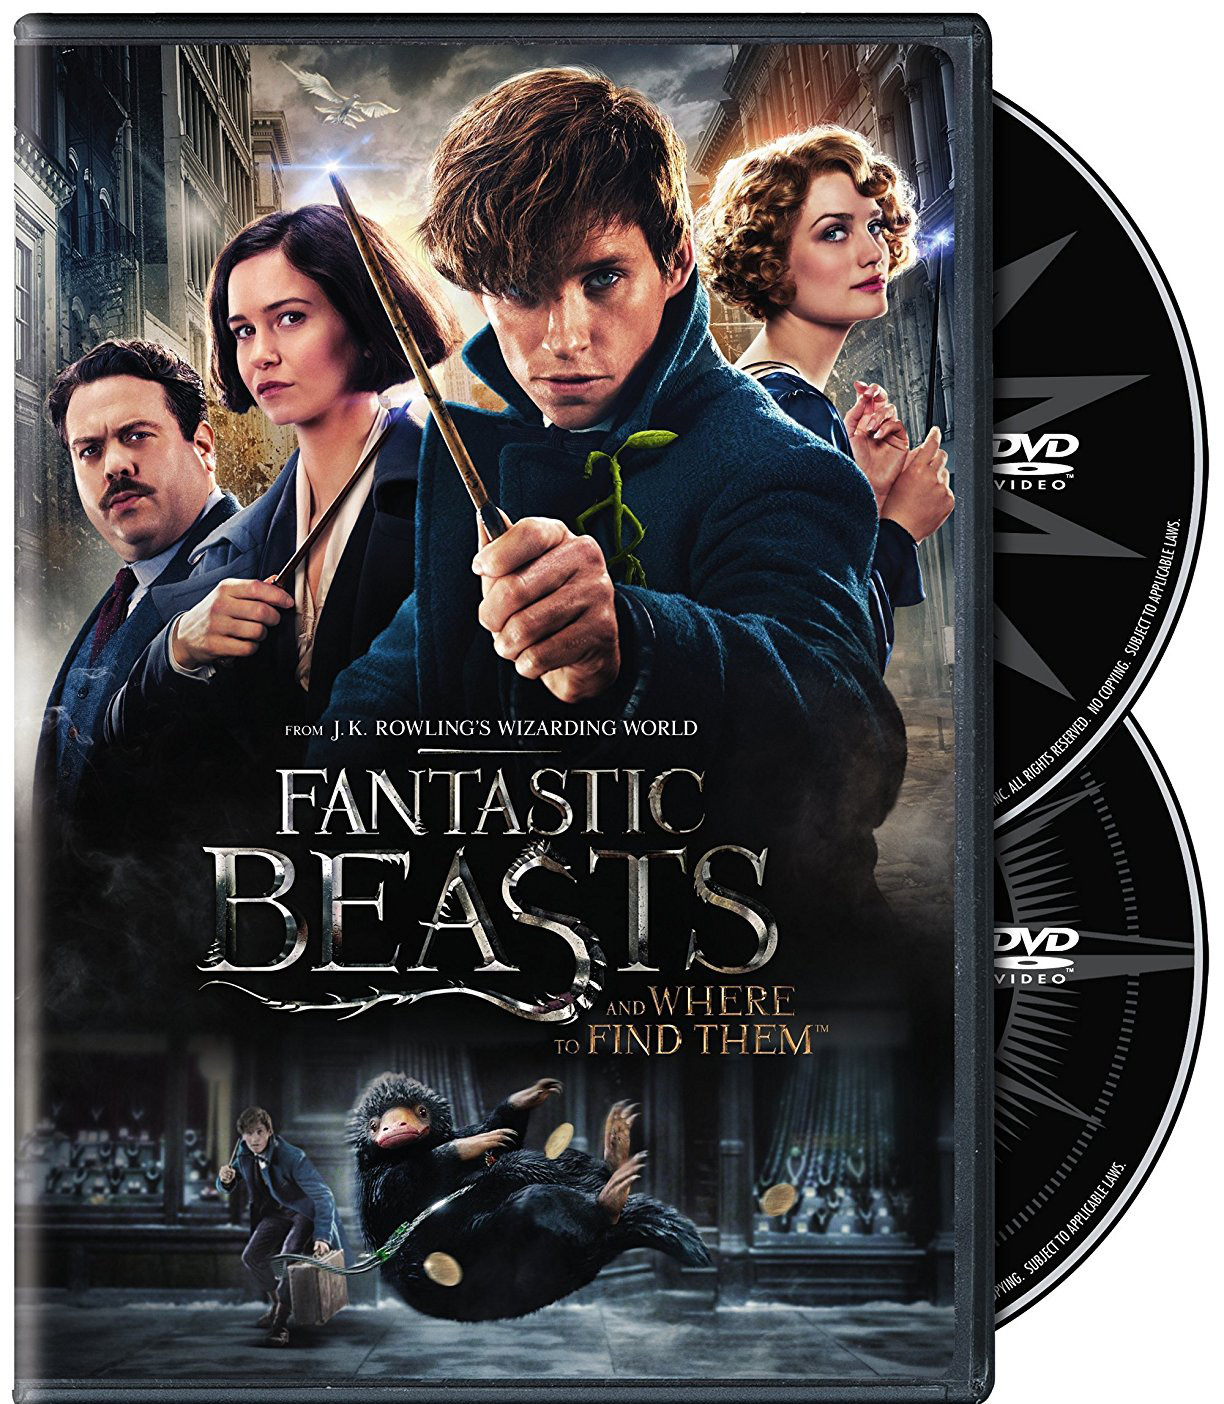 Fantastic Beasts and Where to